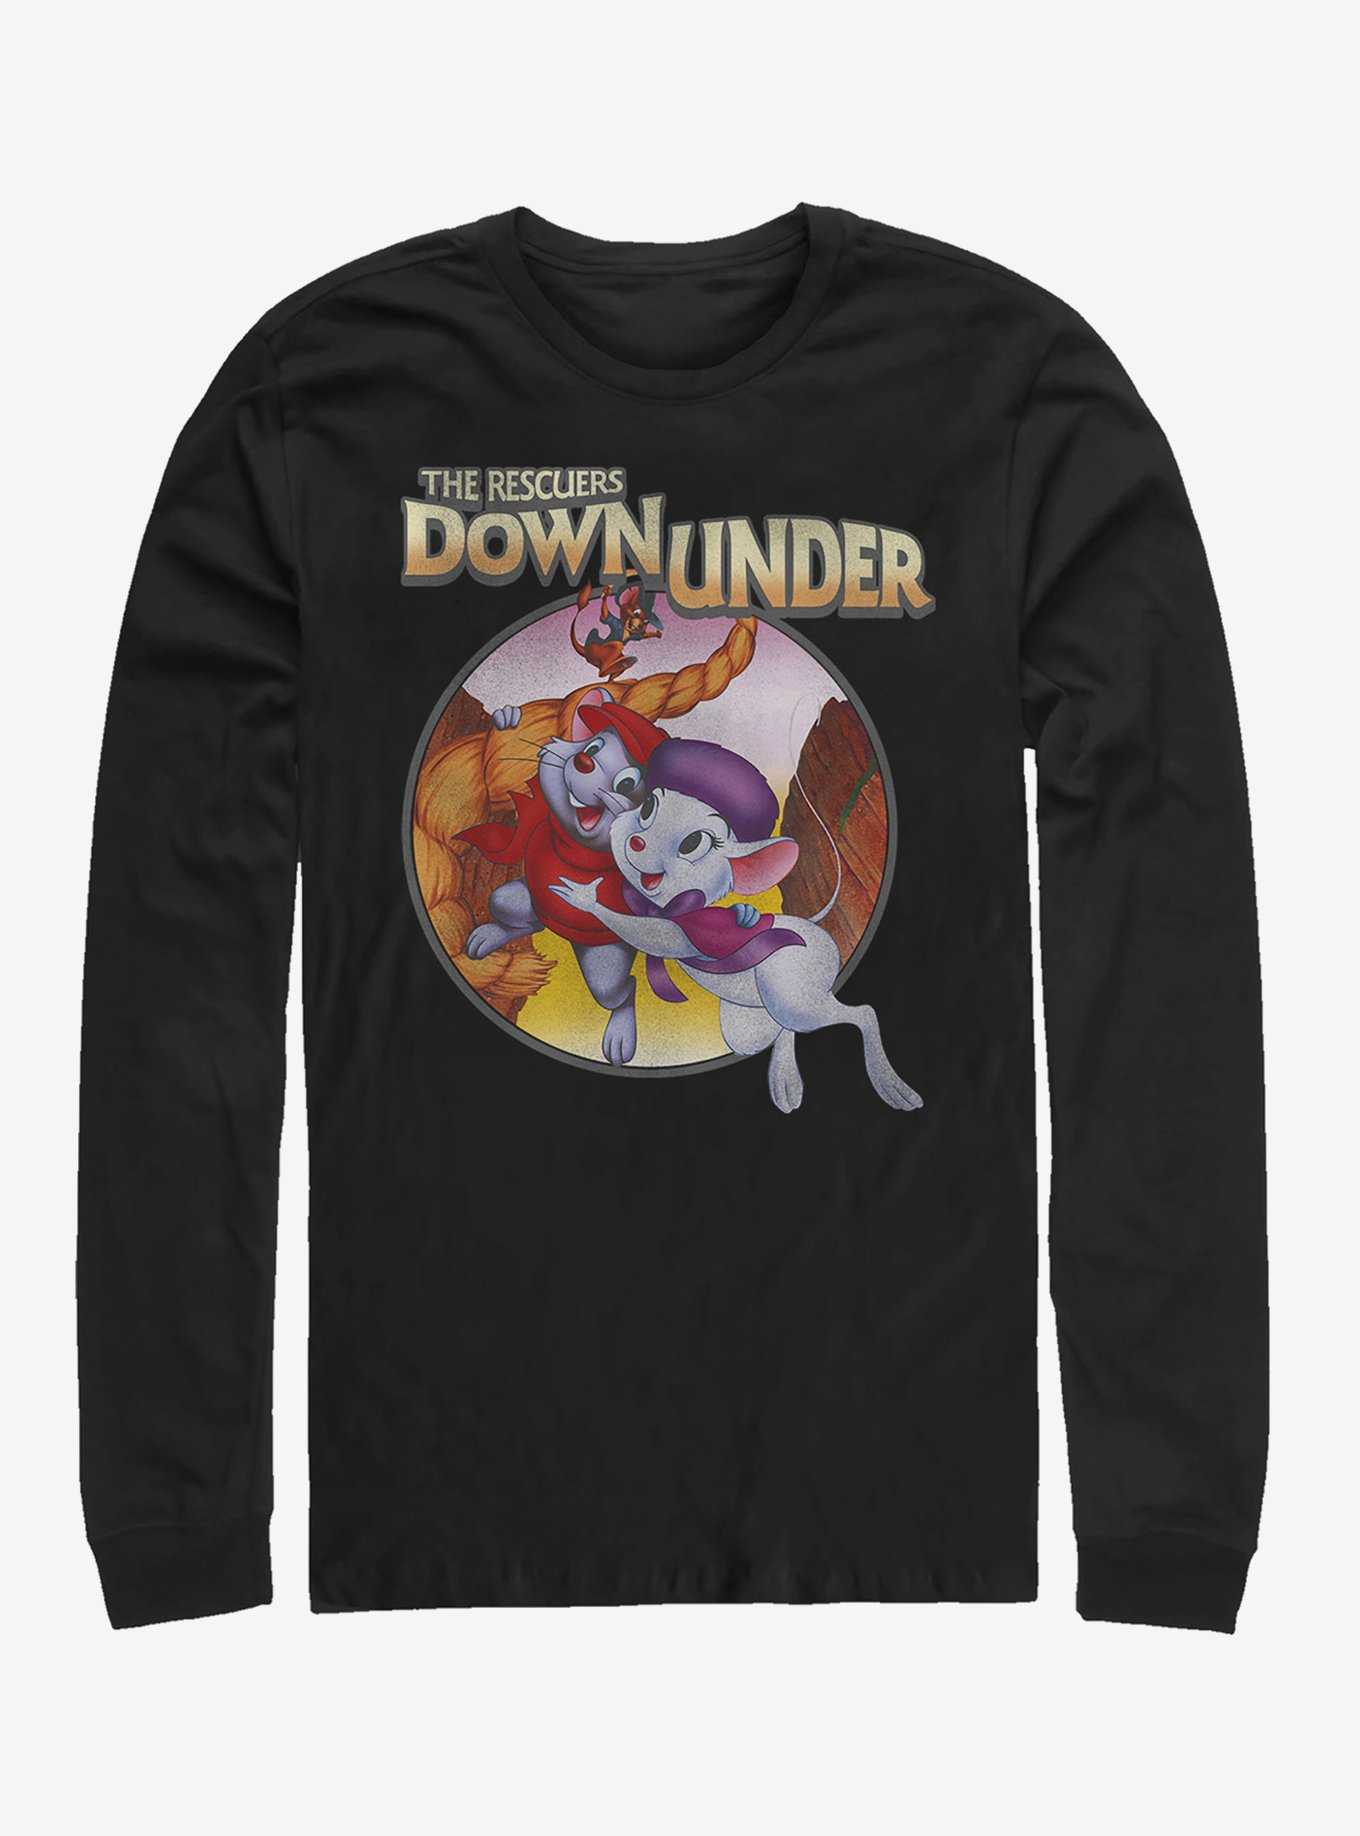 Disney Rescuers Down Under Rescued Long-Sleeve T-Shirt, , hi-res